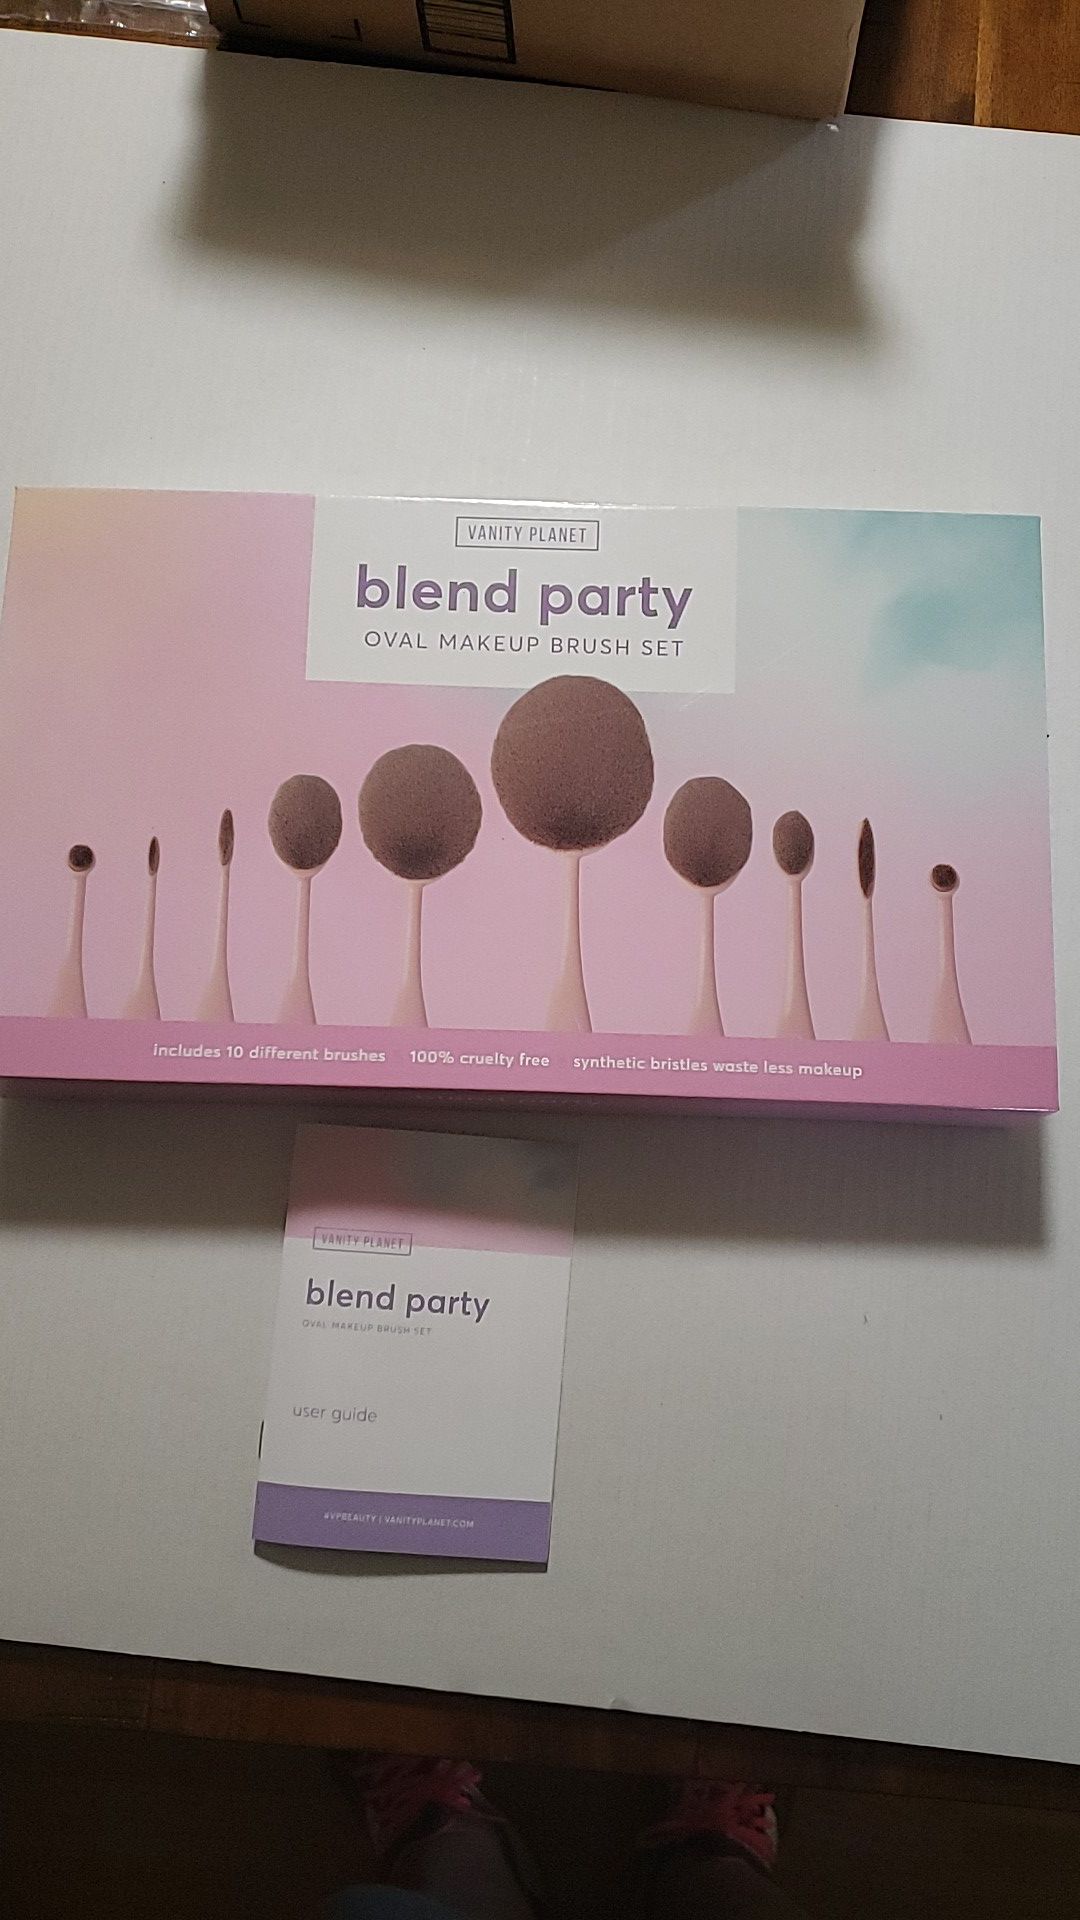 VANITY PLANET BLEND PARTY BRUSHED